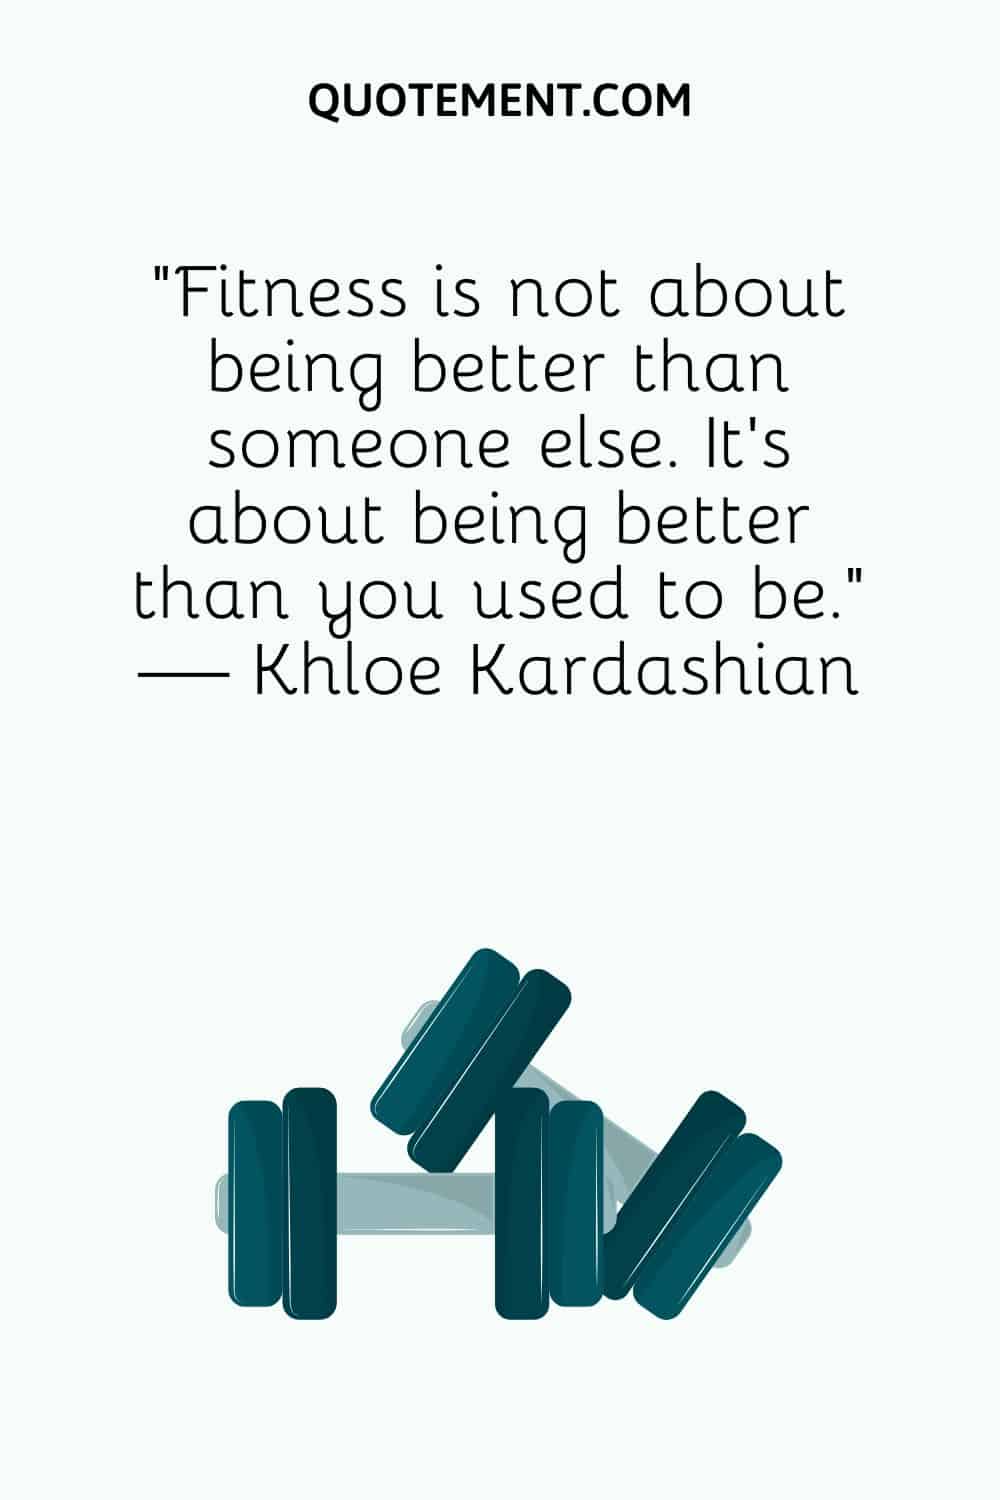 “Fitness is not about being better than someone else. It’s about being better than you used to be.” — Khloe Kardashian